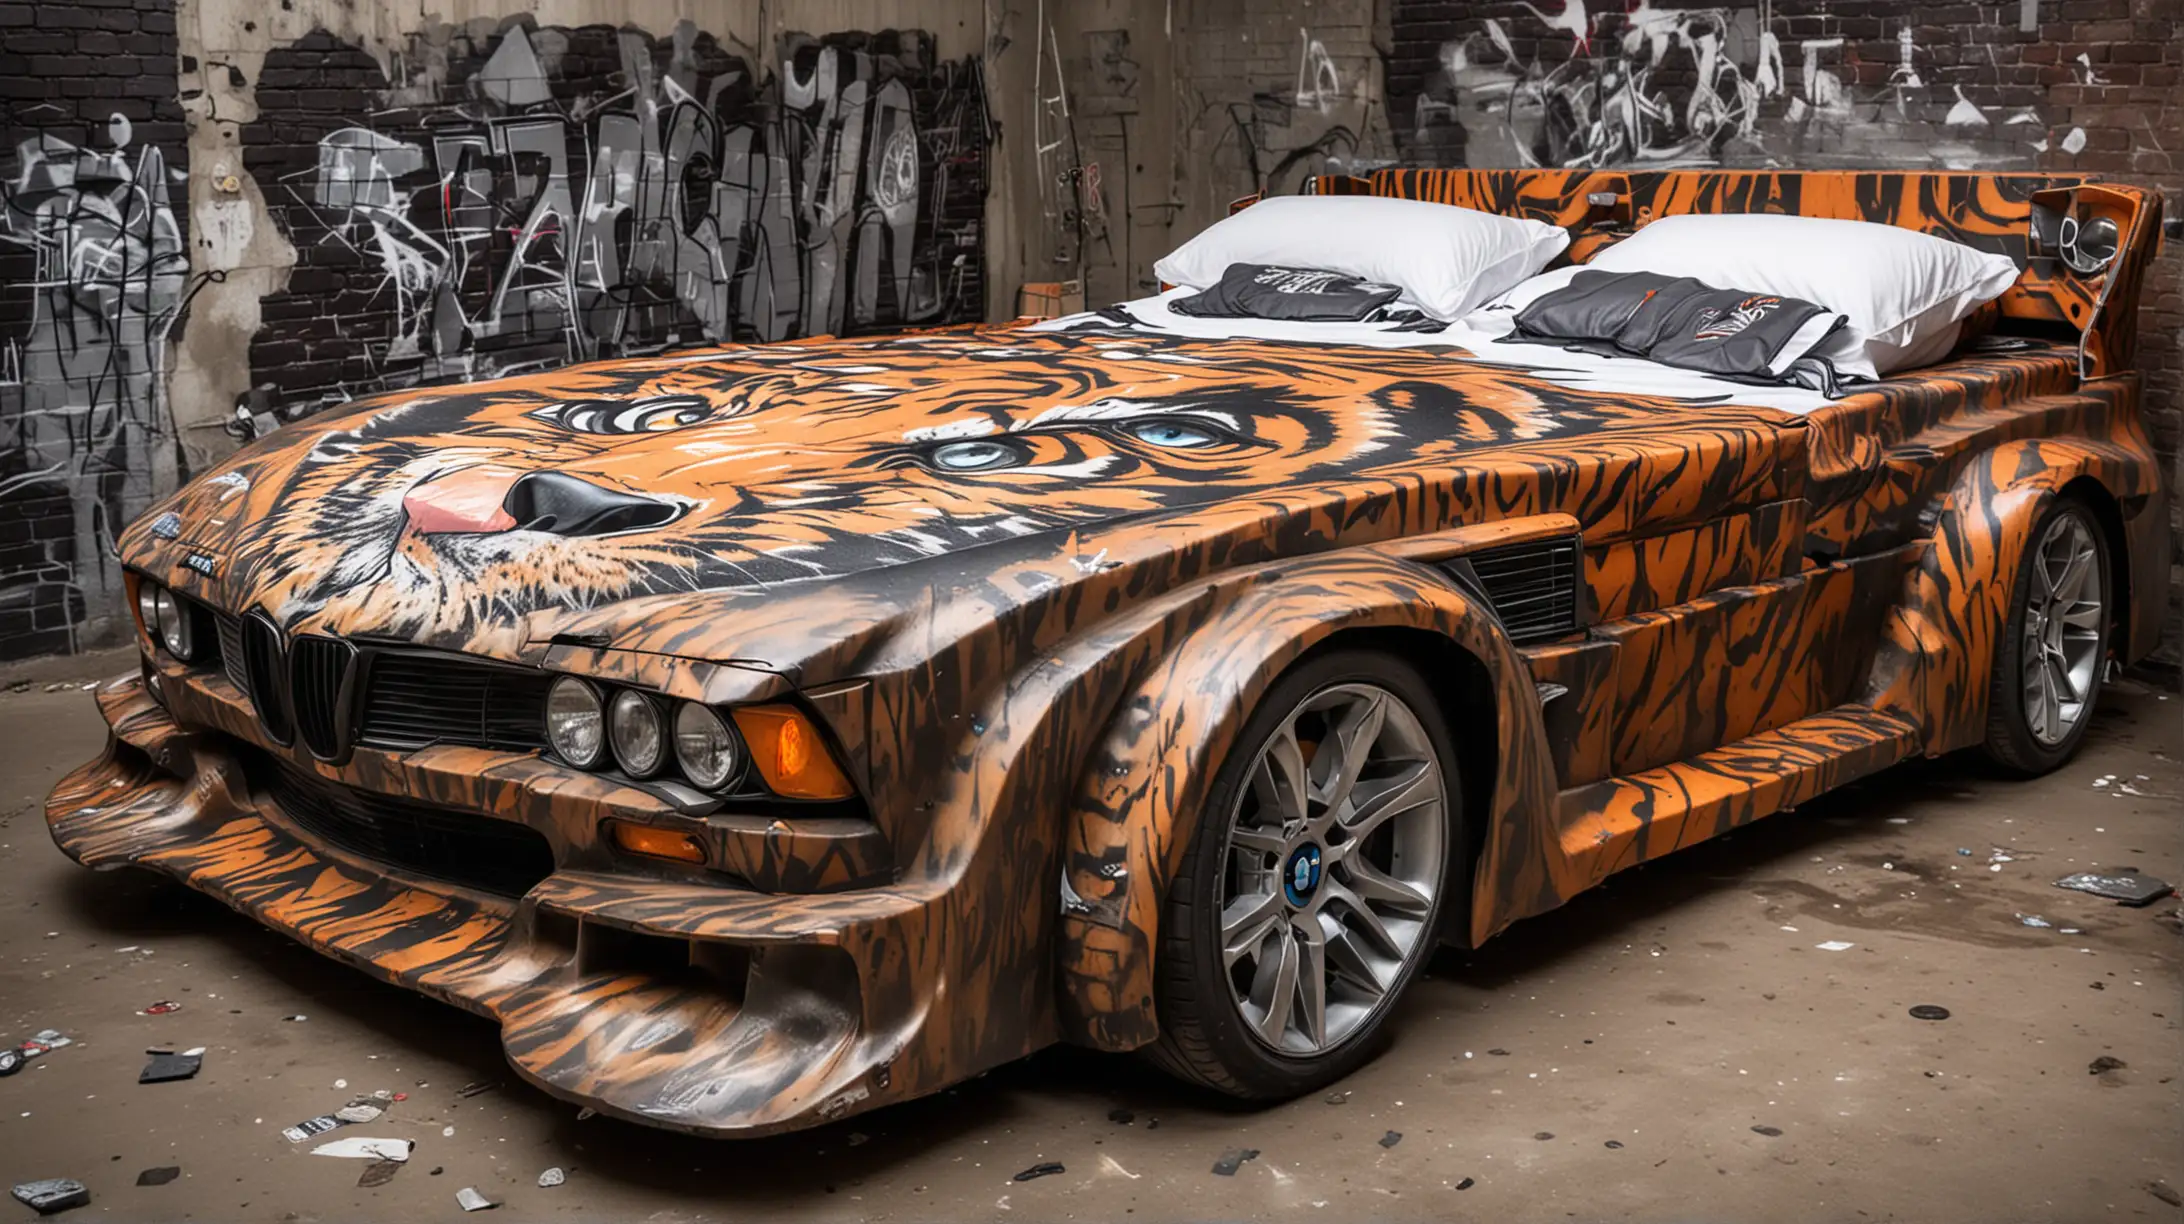 Luxury BMW Car Double Bed with Illuminated Headlights and Angry Tiger Graffiti